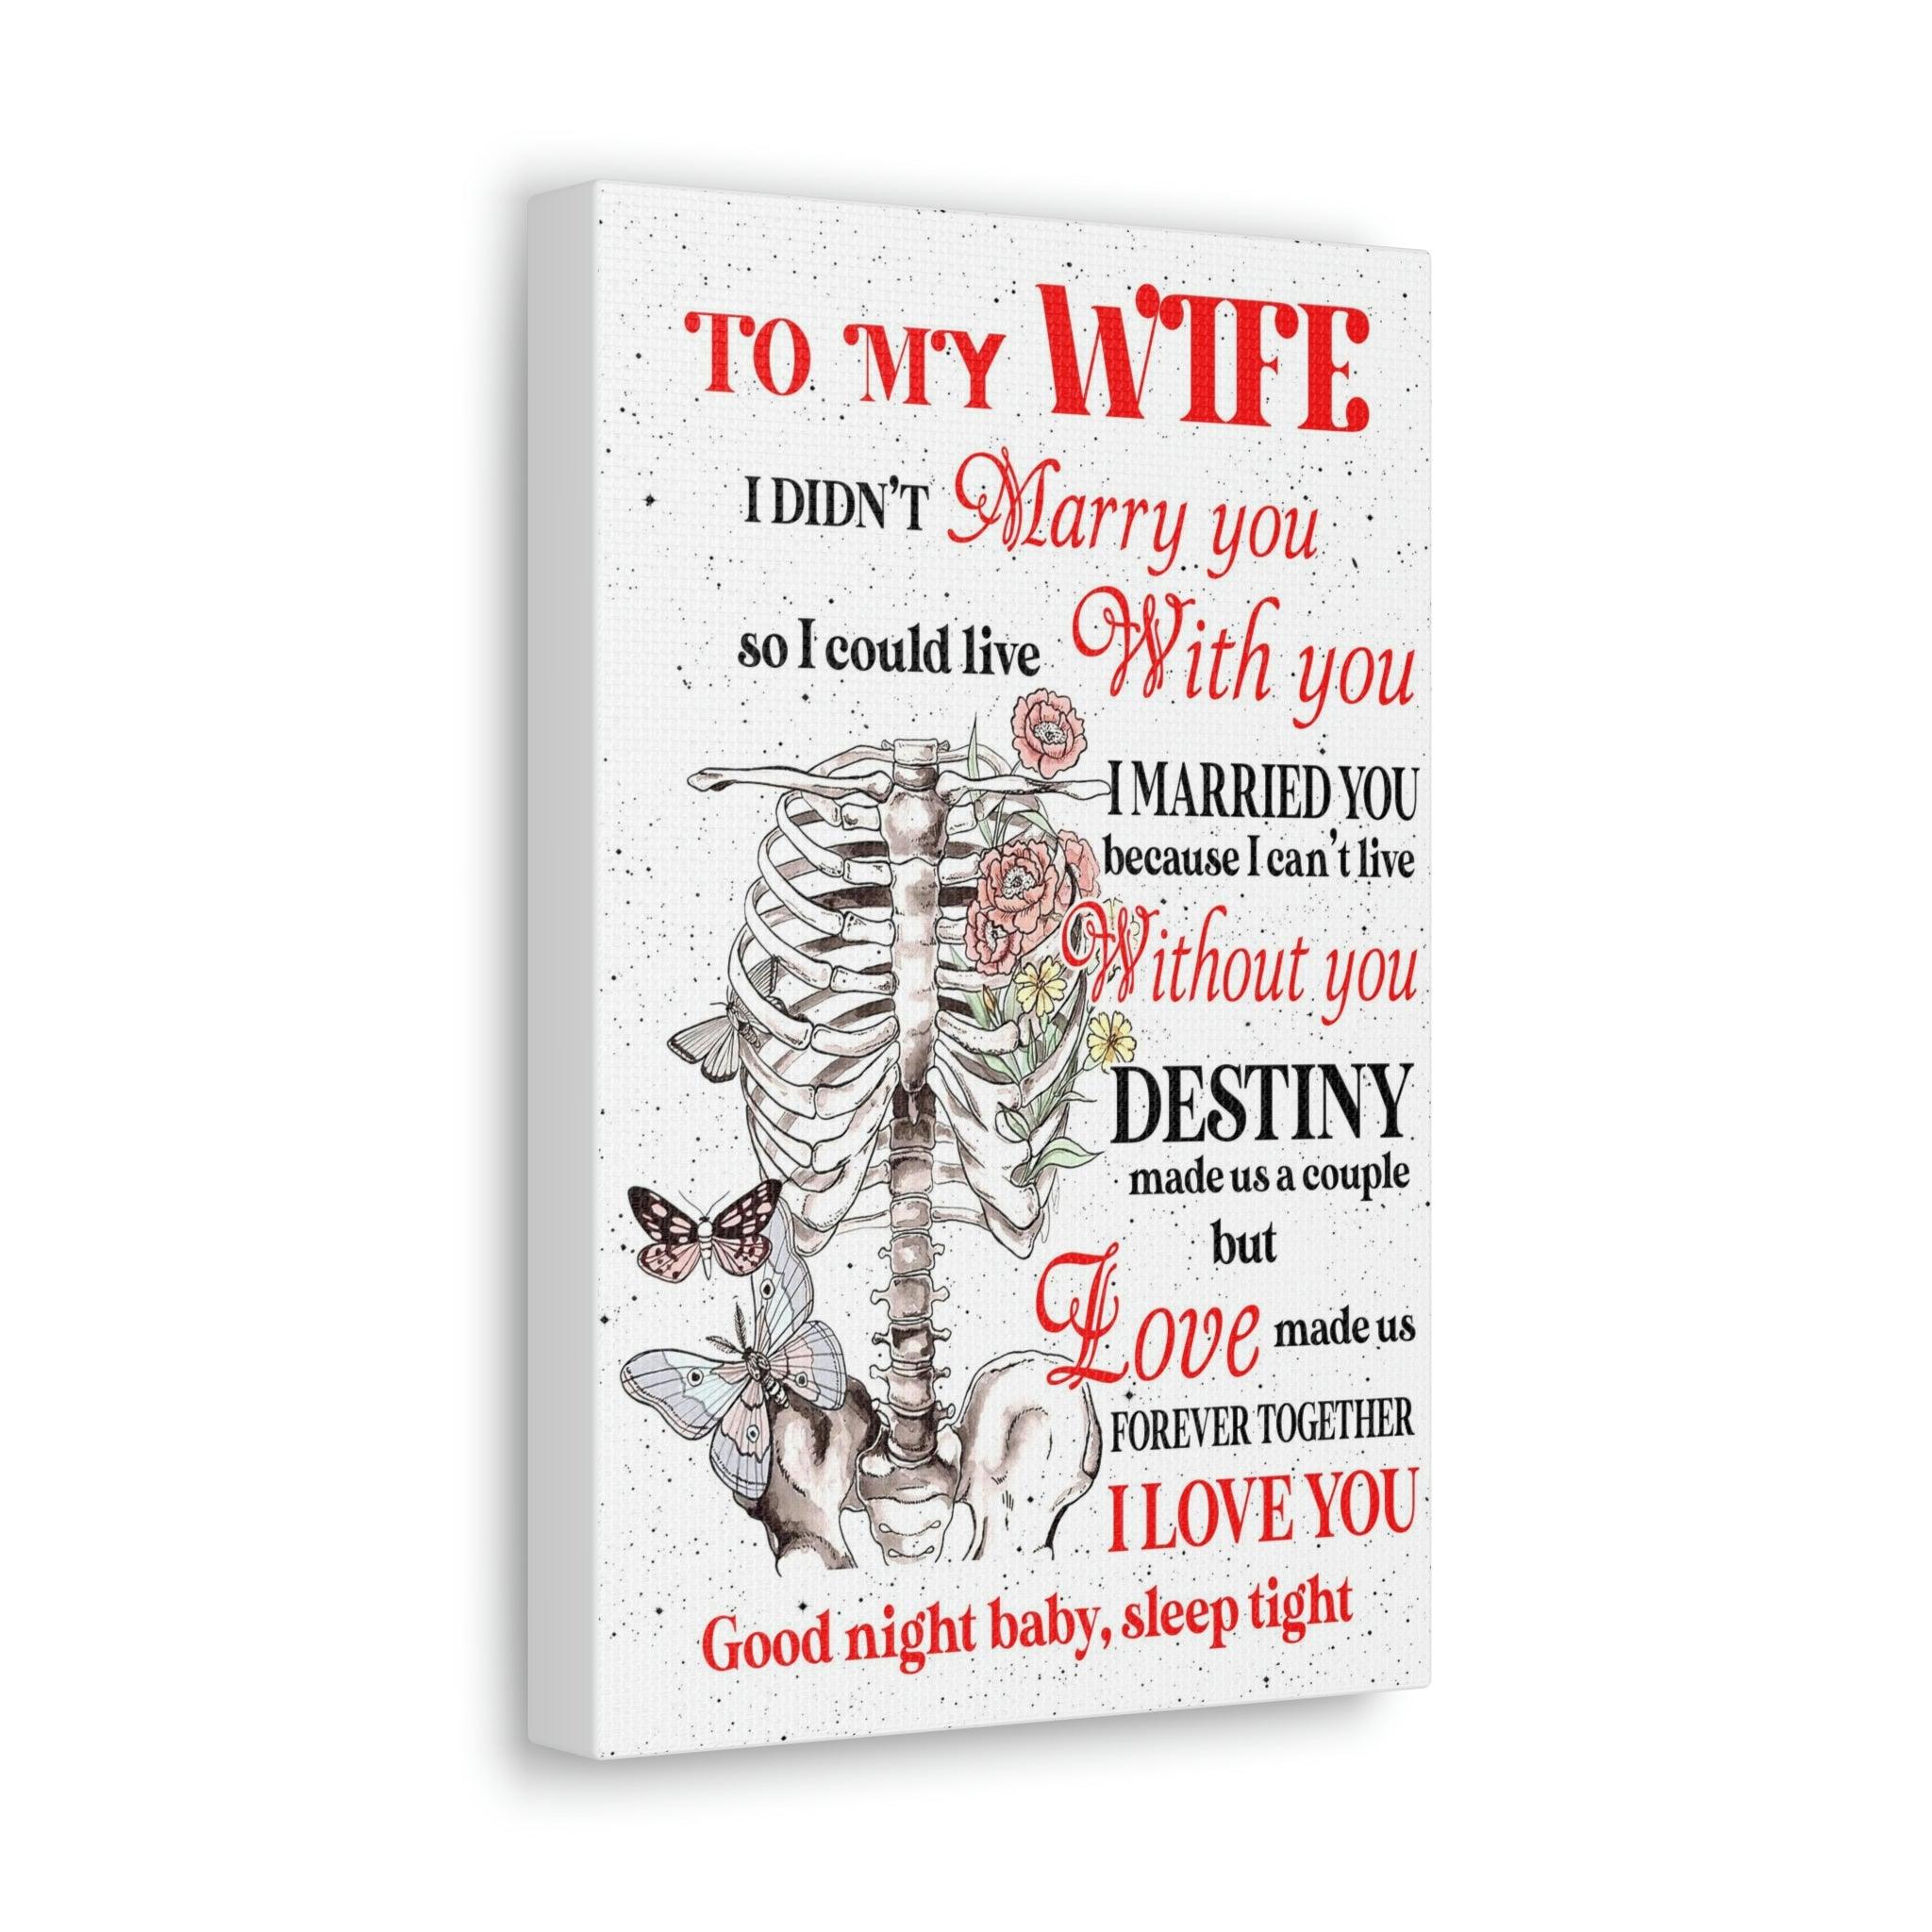 Without You Destiny - Classic Canvas For Valentines - Wonder Skull